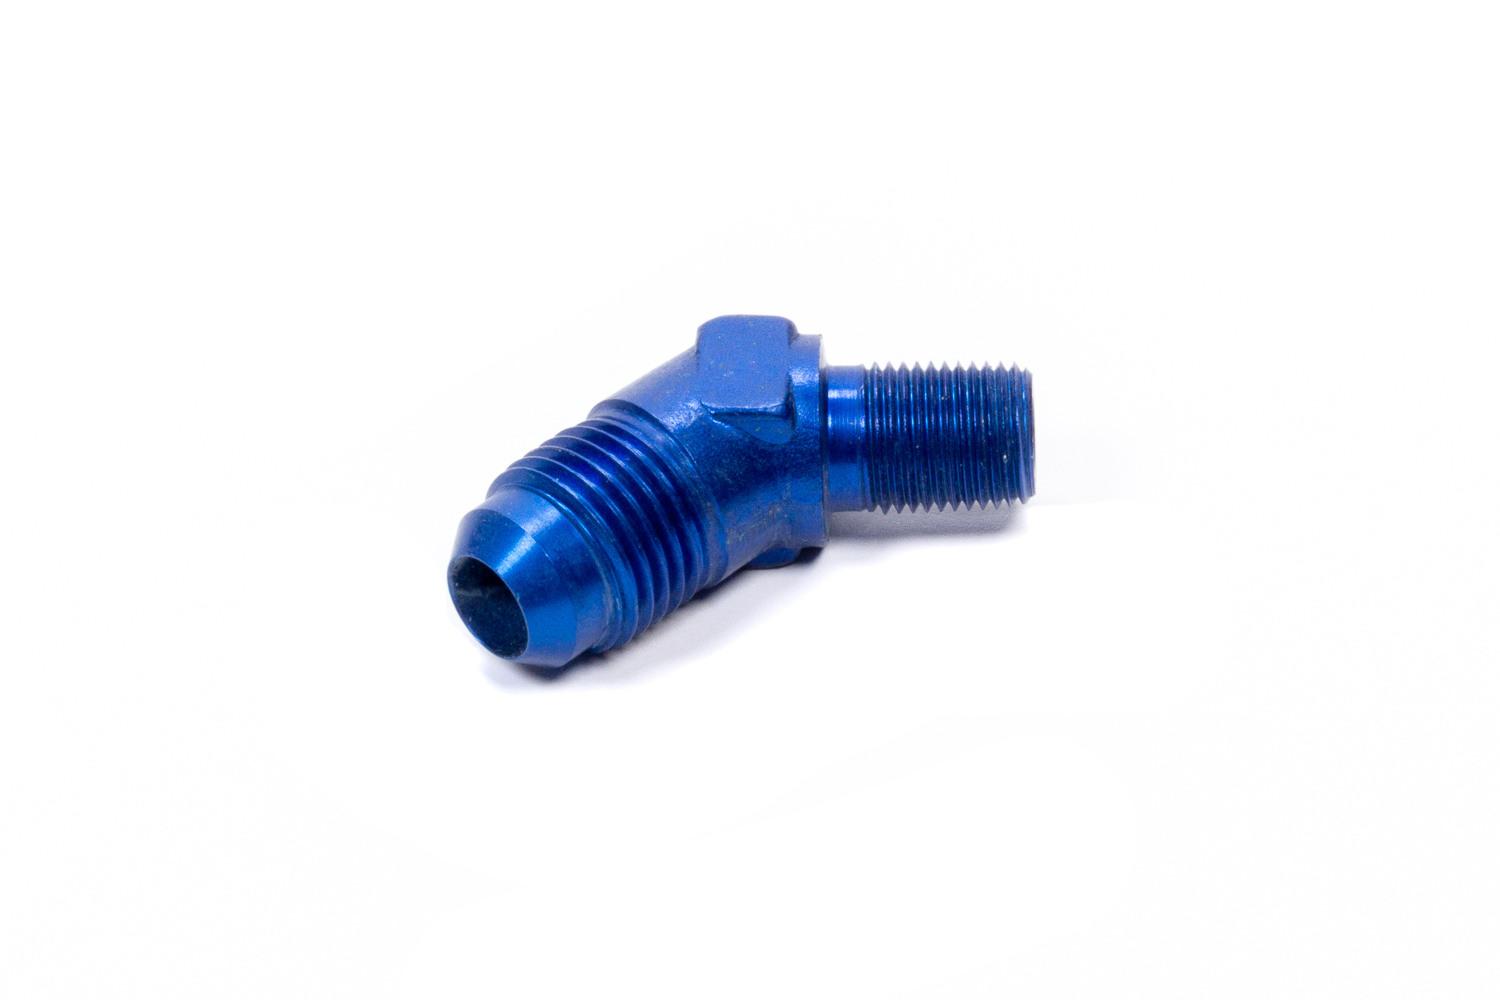 Fragola 482362 Fitting, Adapter, 45 Degree, 6 AN Male to 1/8 in NPT Male, Aluminum, Blue Anodized, Each